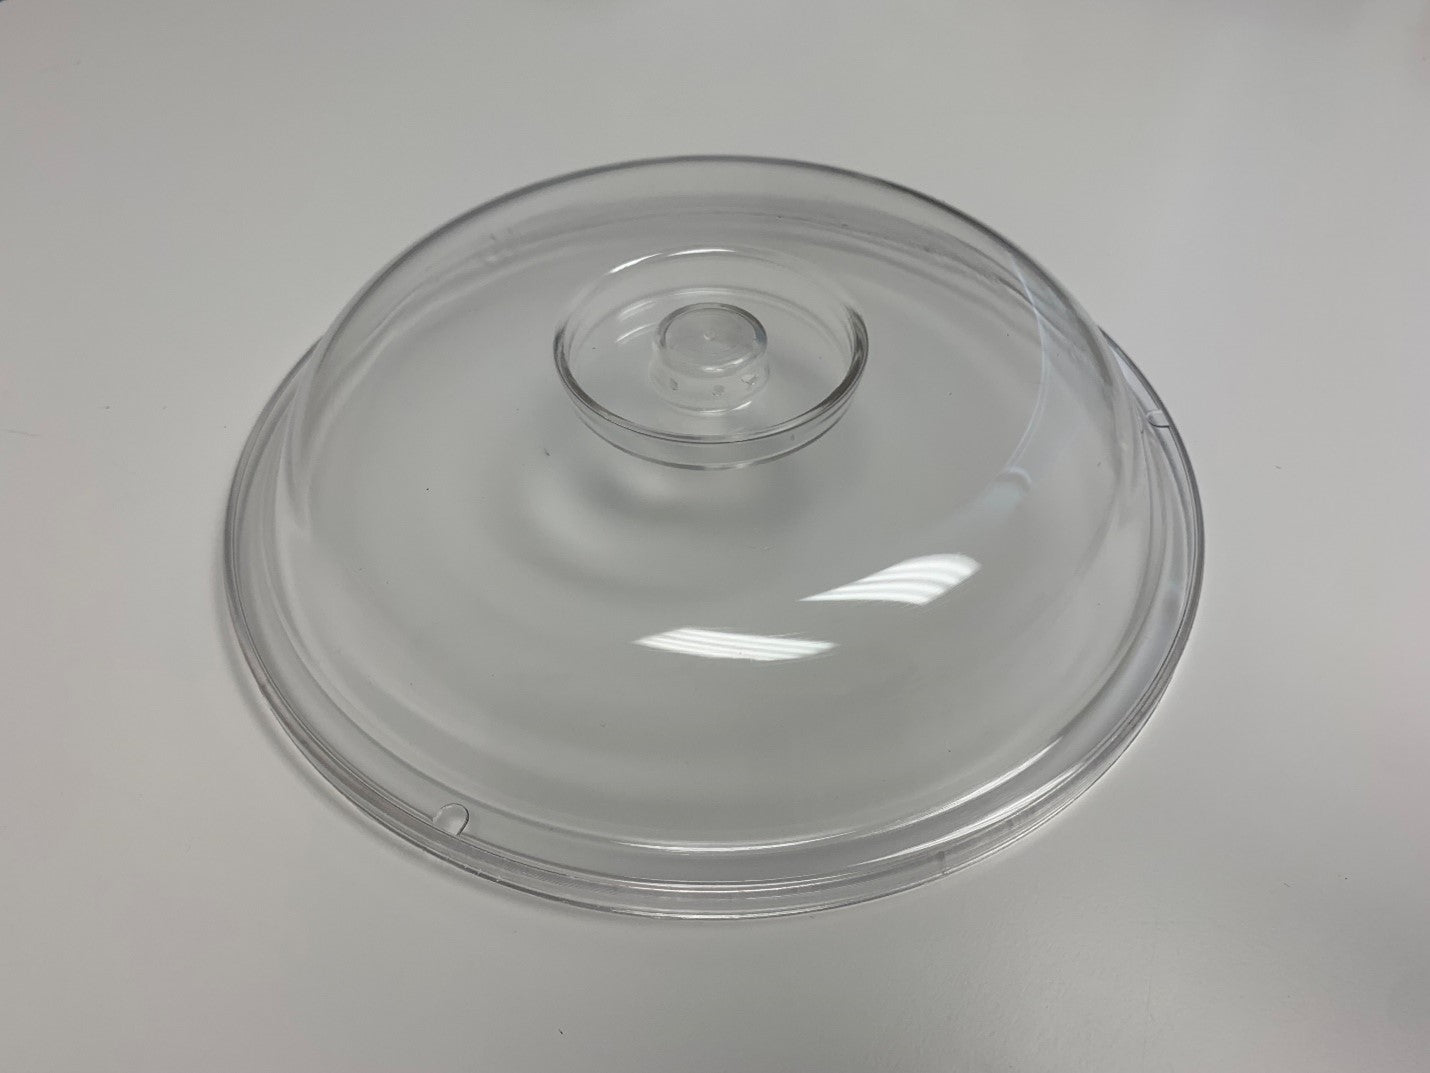 RDC-775-CL - High Temp Reusable Plastic 7.75"Round Clear Retherma Plate Dome Cover